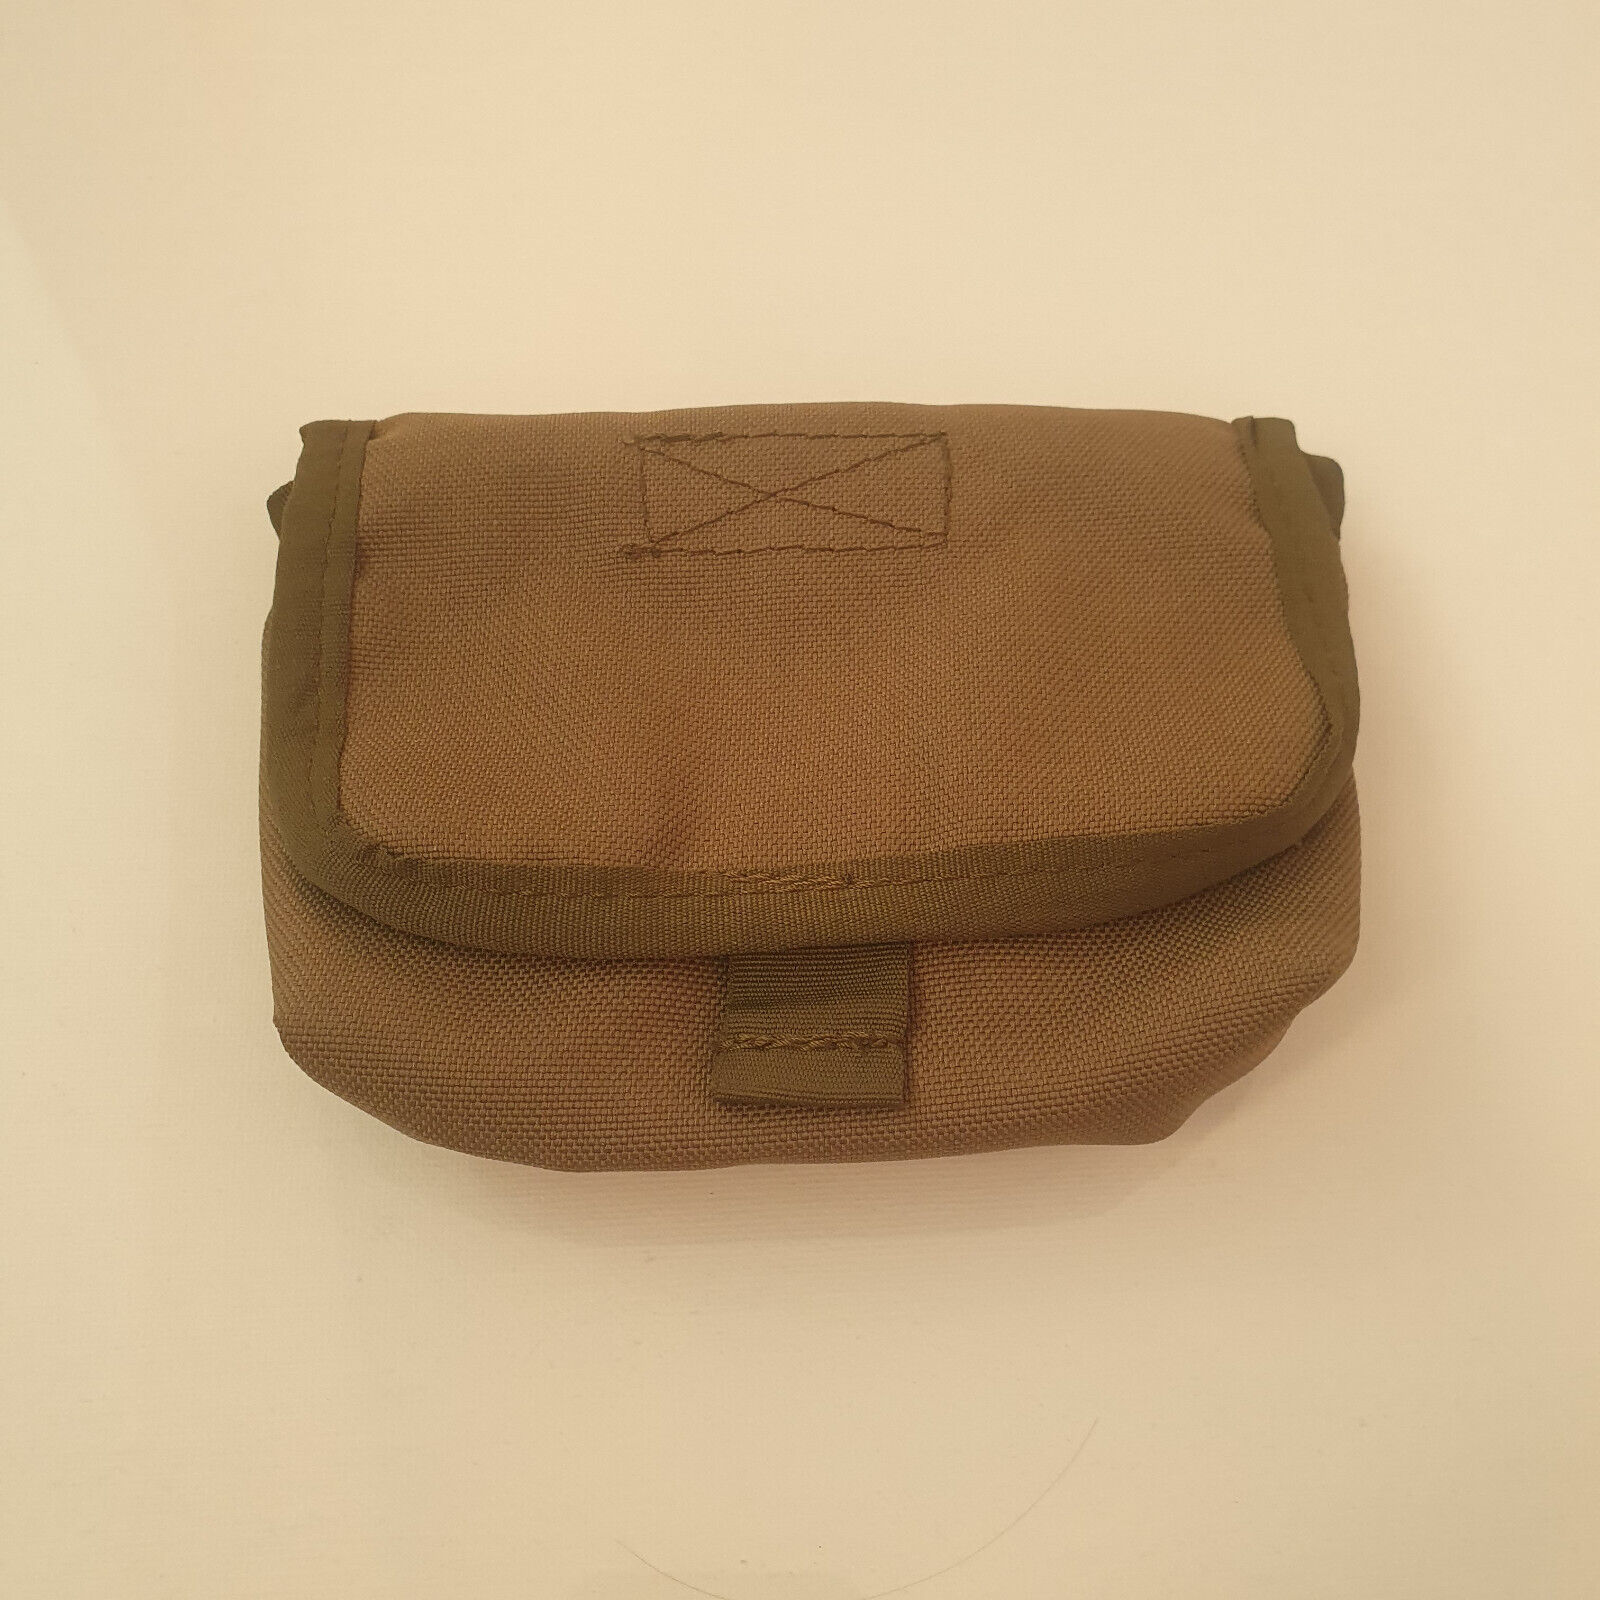 Rus Army IPP Pouch SSO-SPOSN Emergency Bandage Prototype Revision Rare